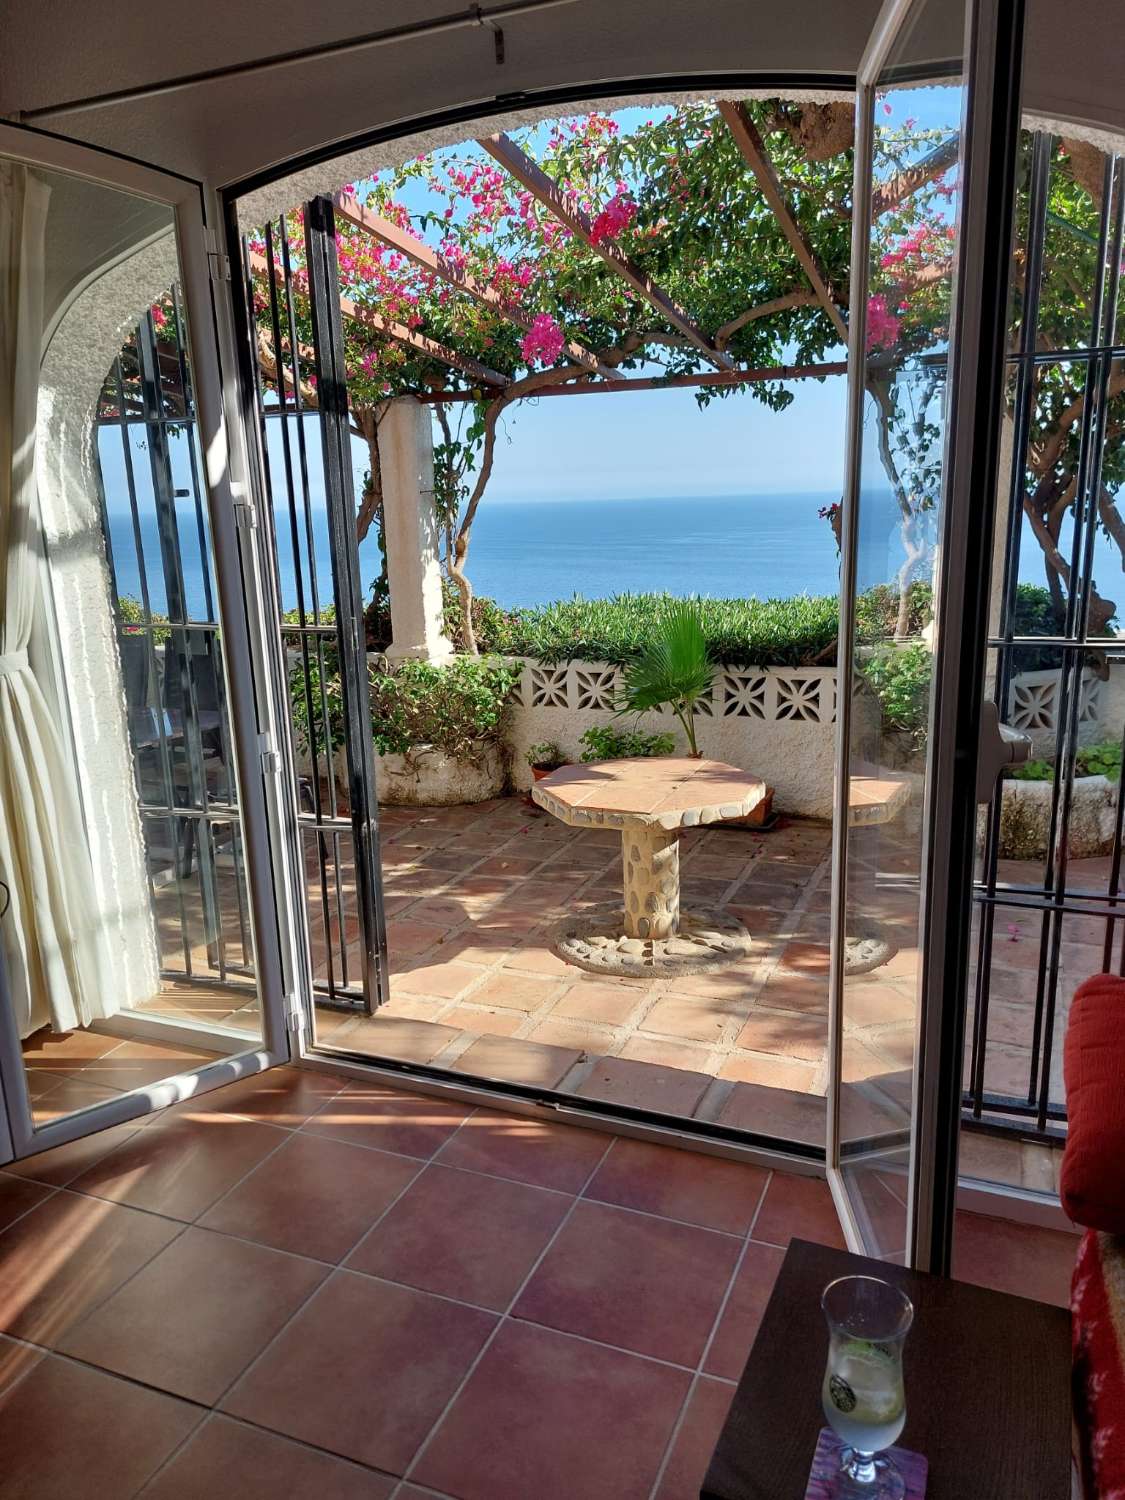 Wonderful villa for sale with private pool, mature gardens and panoramic sea views